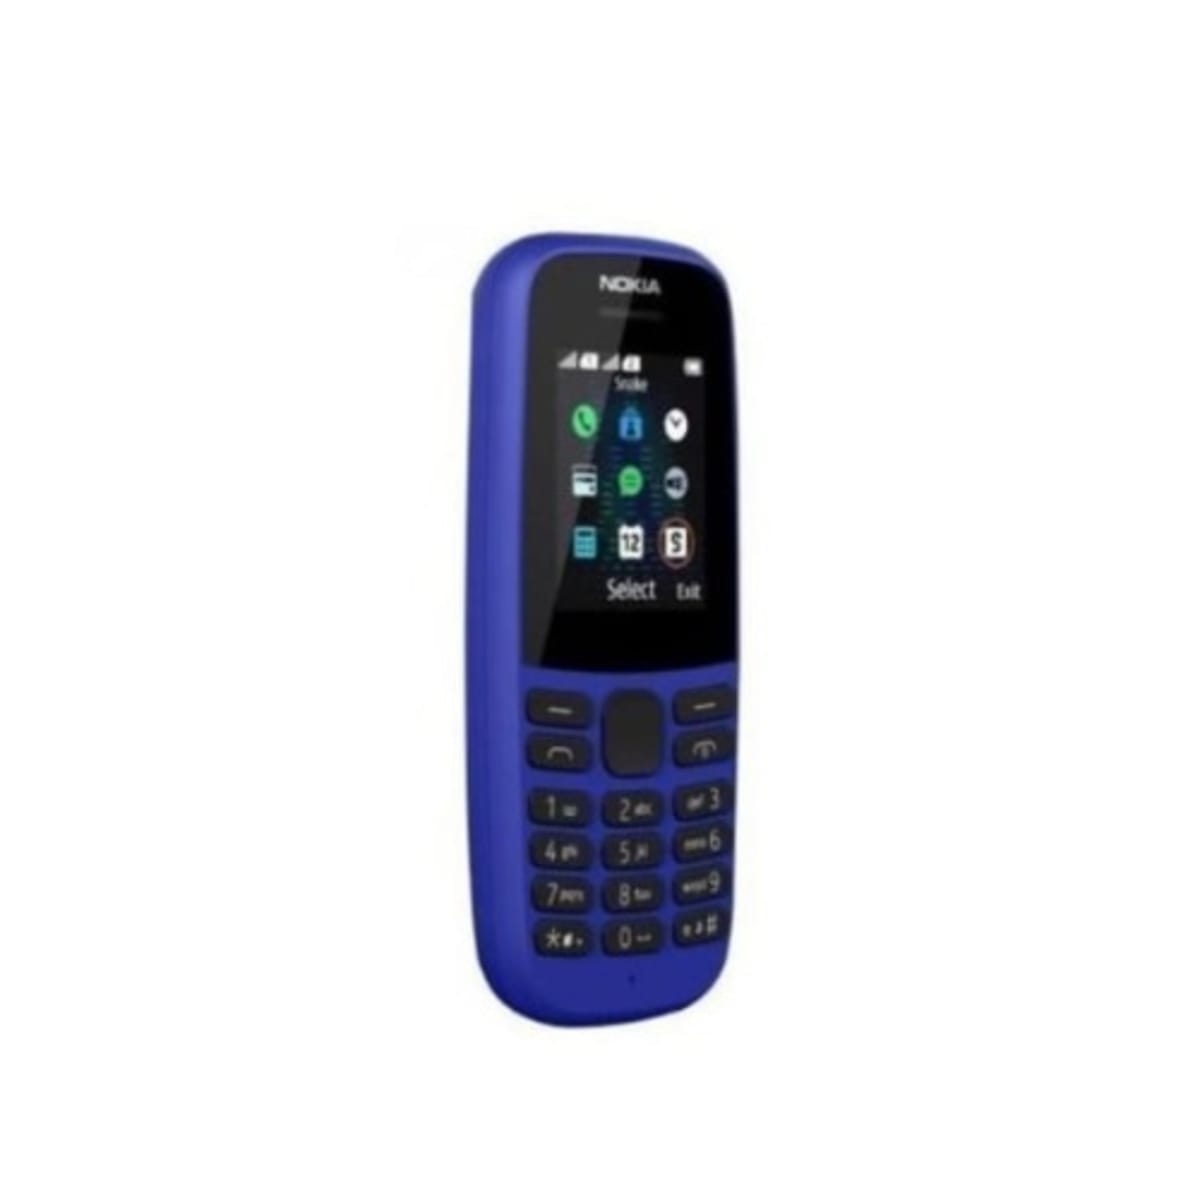 Nokia 105 now has Africa edition